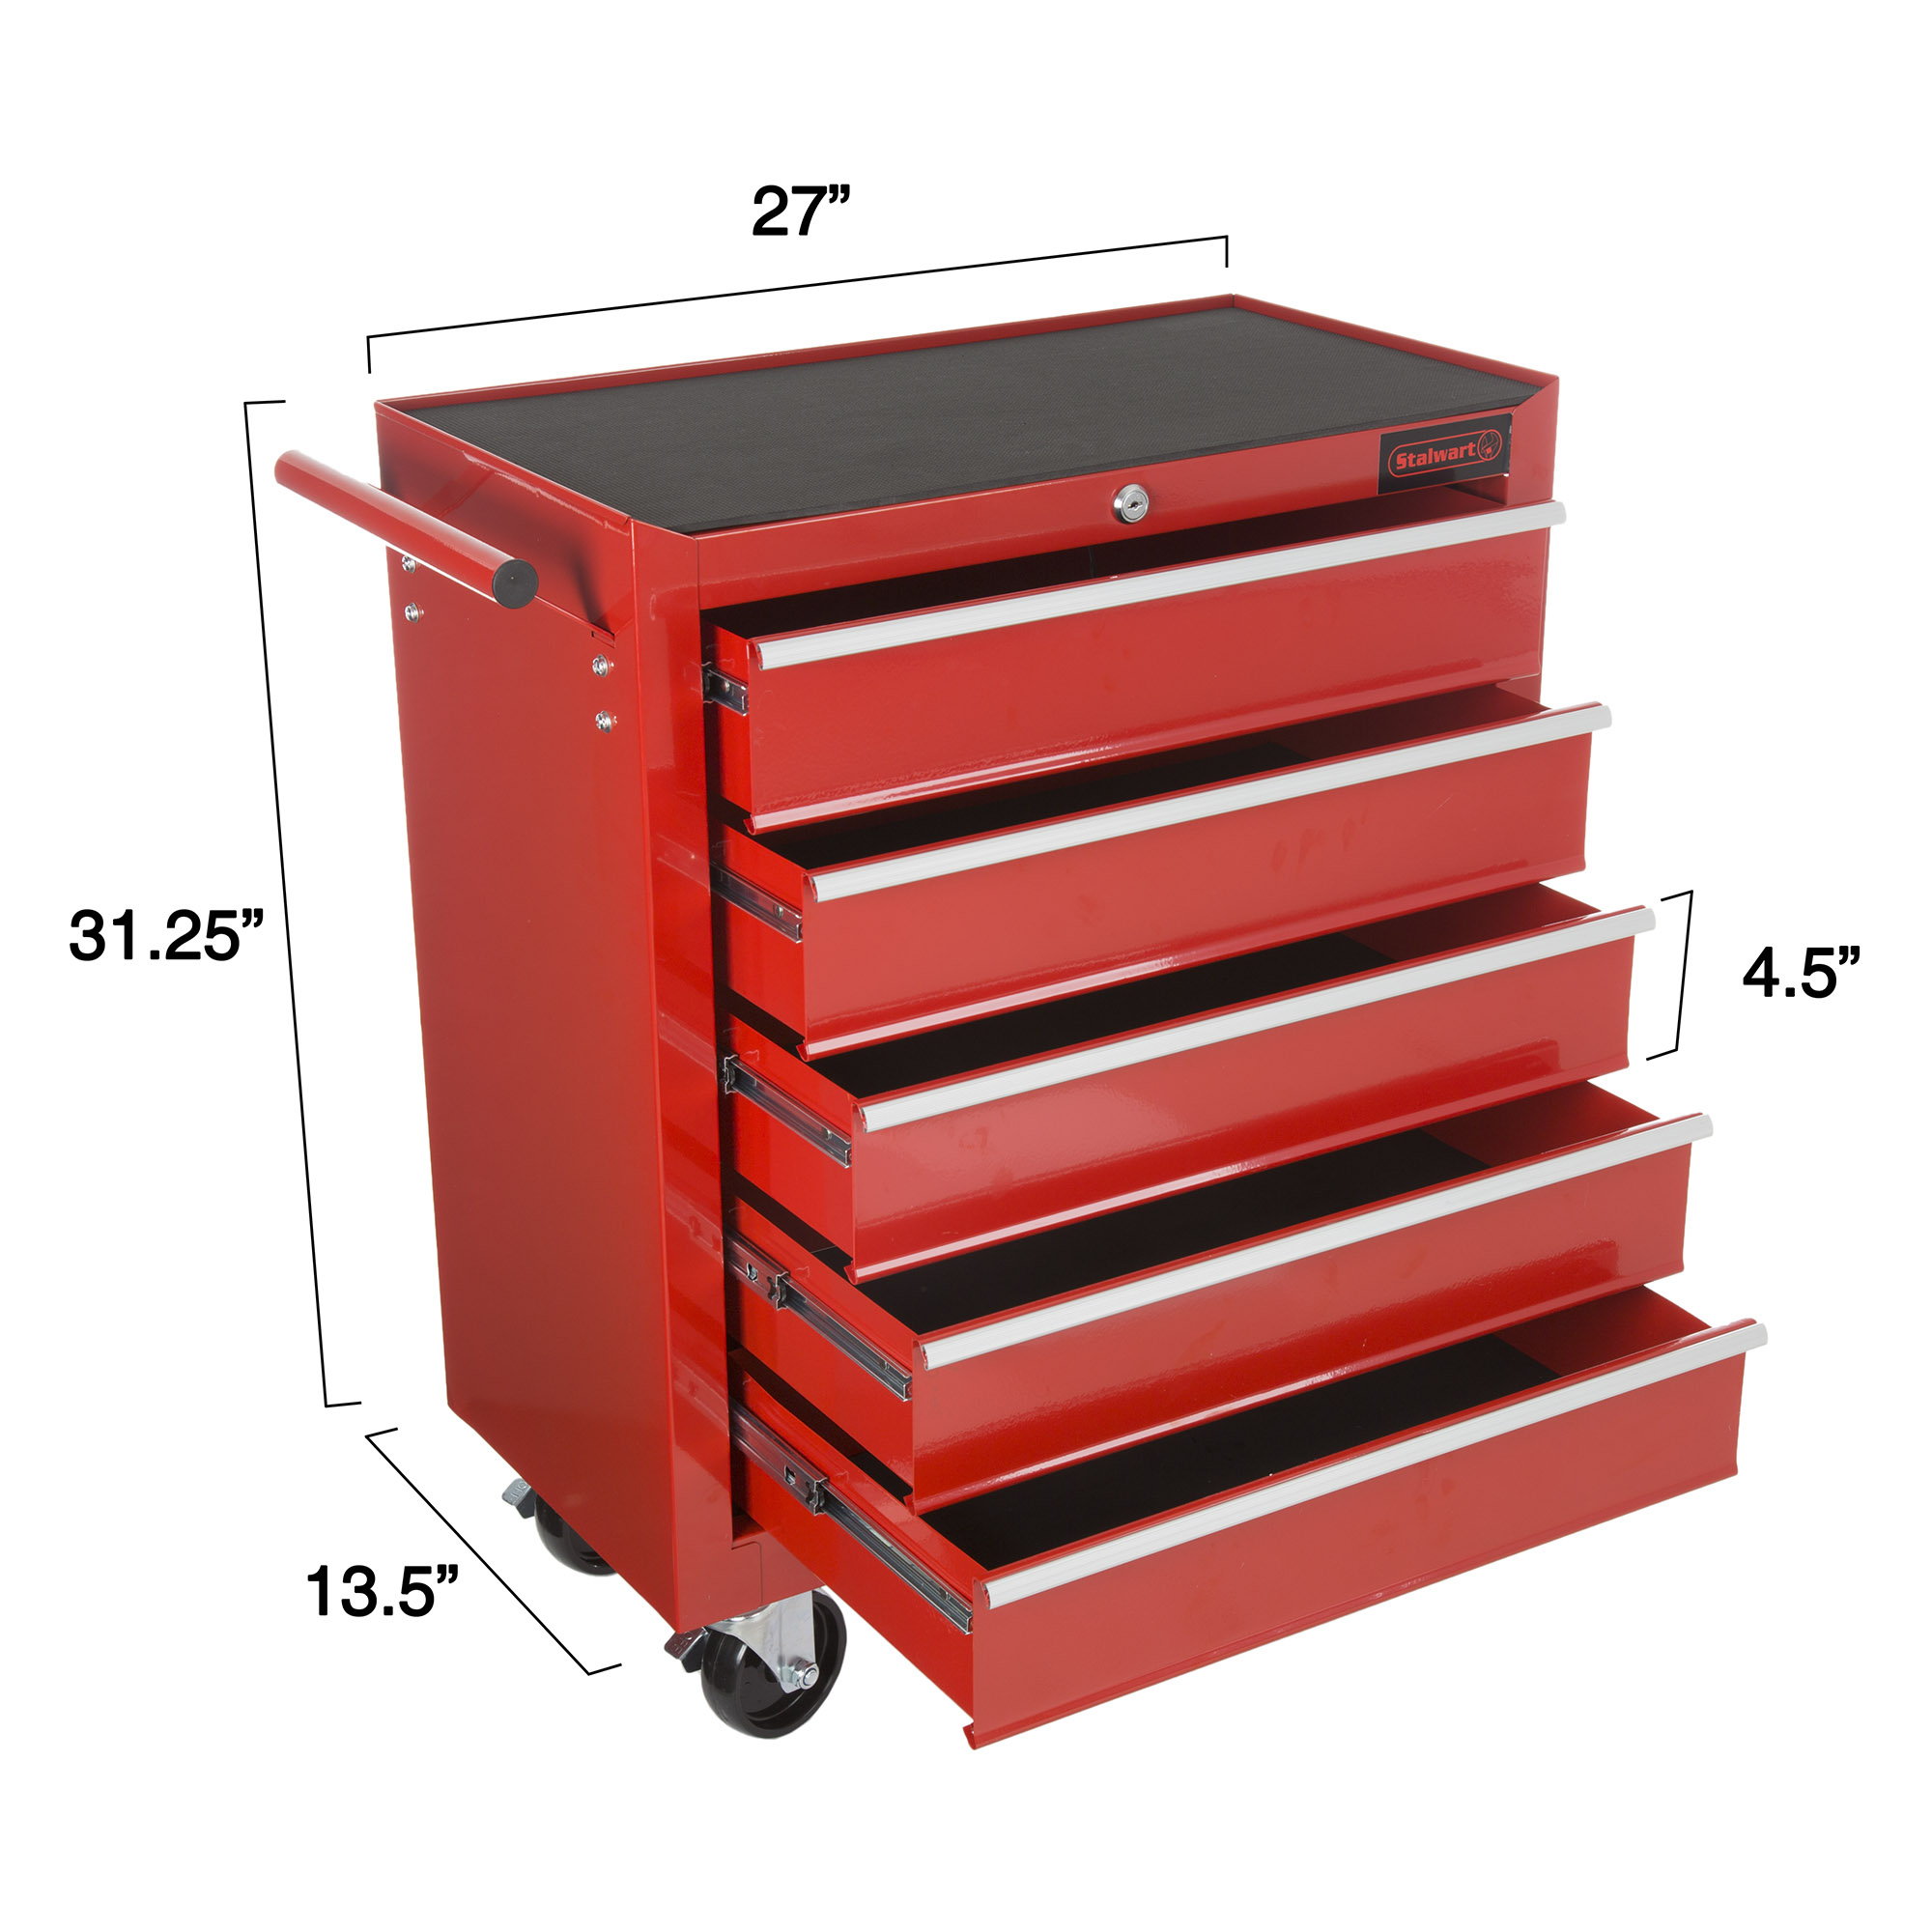 Rolling Tool Box Cabinet, 5 Drawer Portable Storage Chest Tools Organizer With Wheels, Ball Bearing Locking and Sliding Drawers By Stalwart (Red) - image 2 of 4